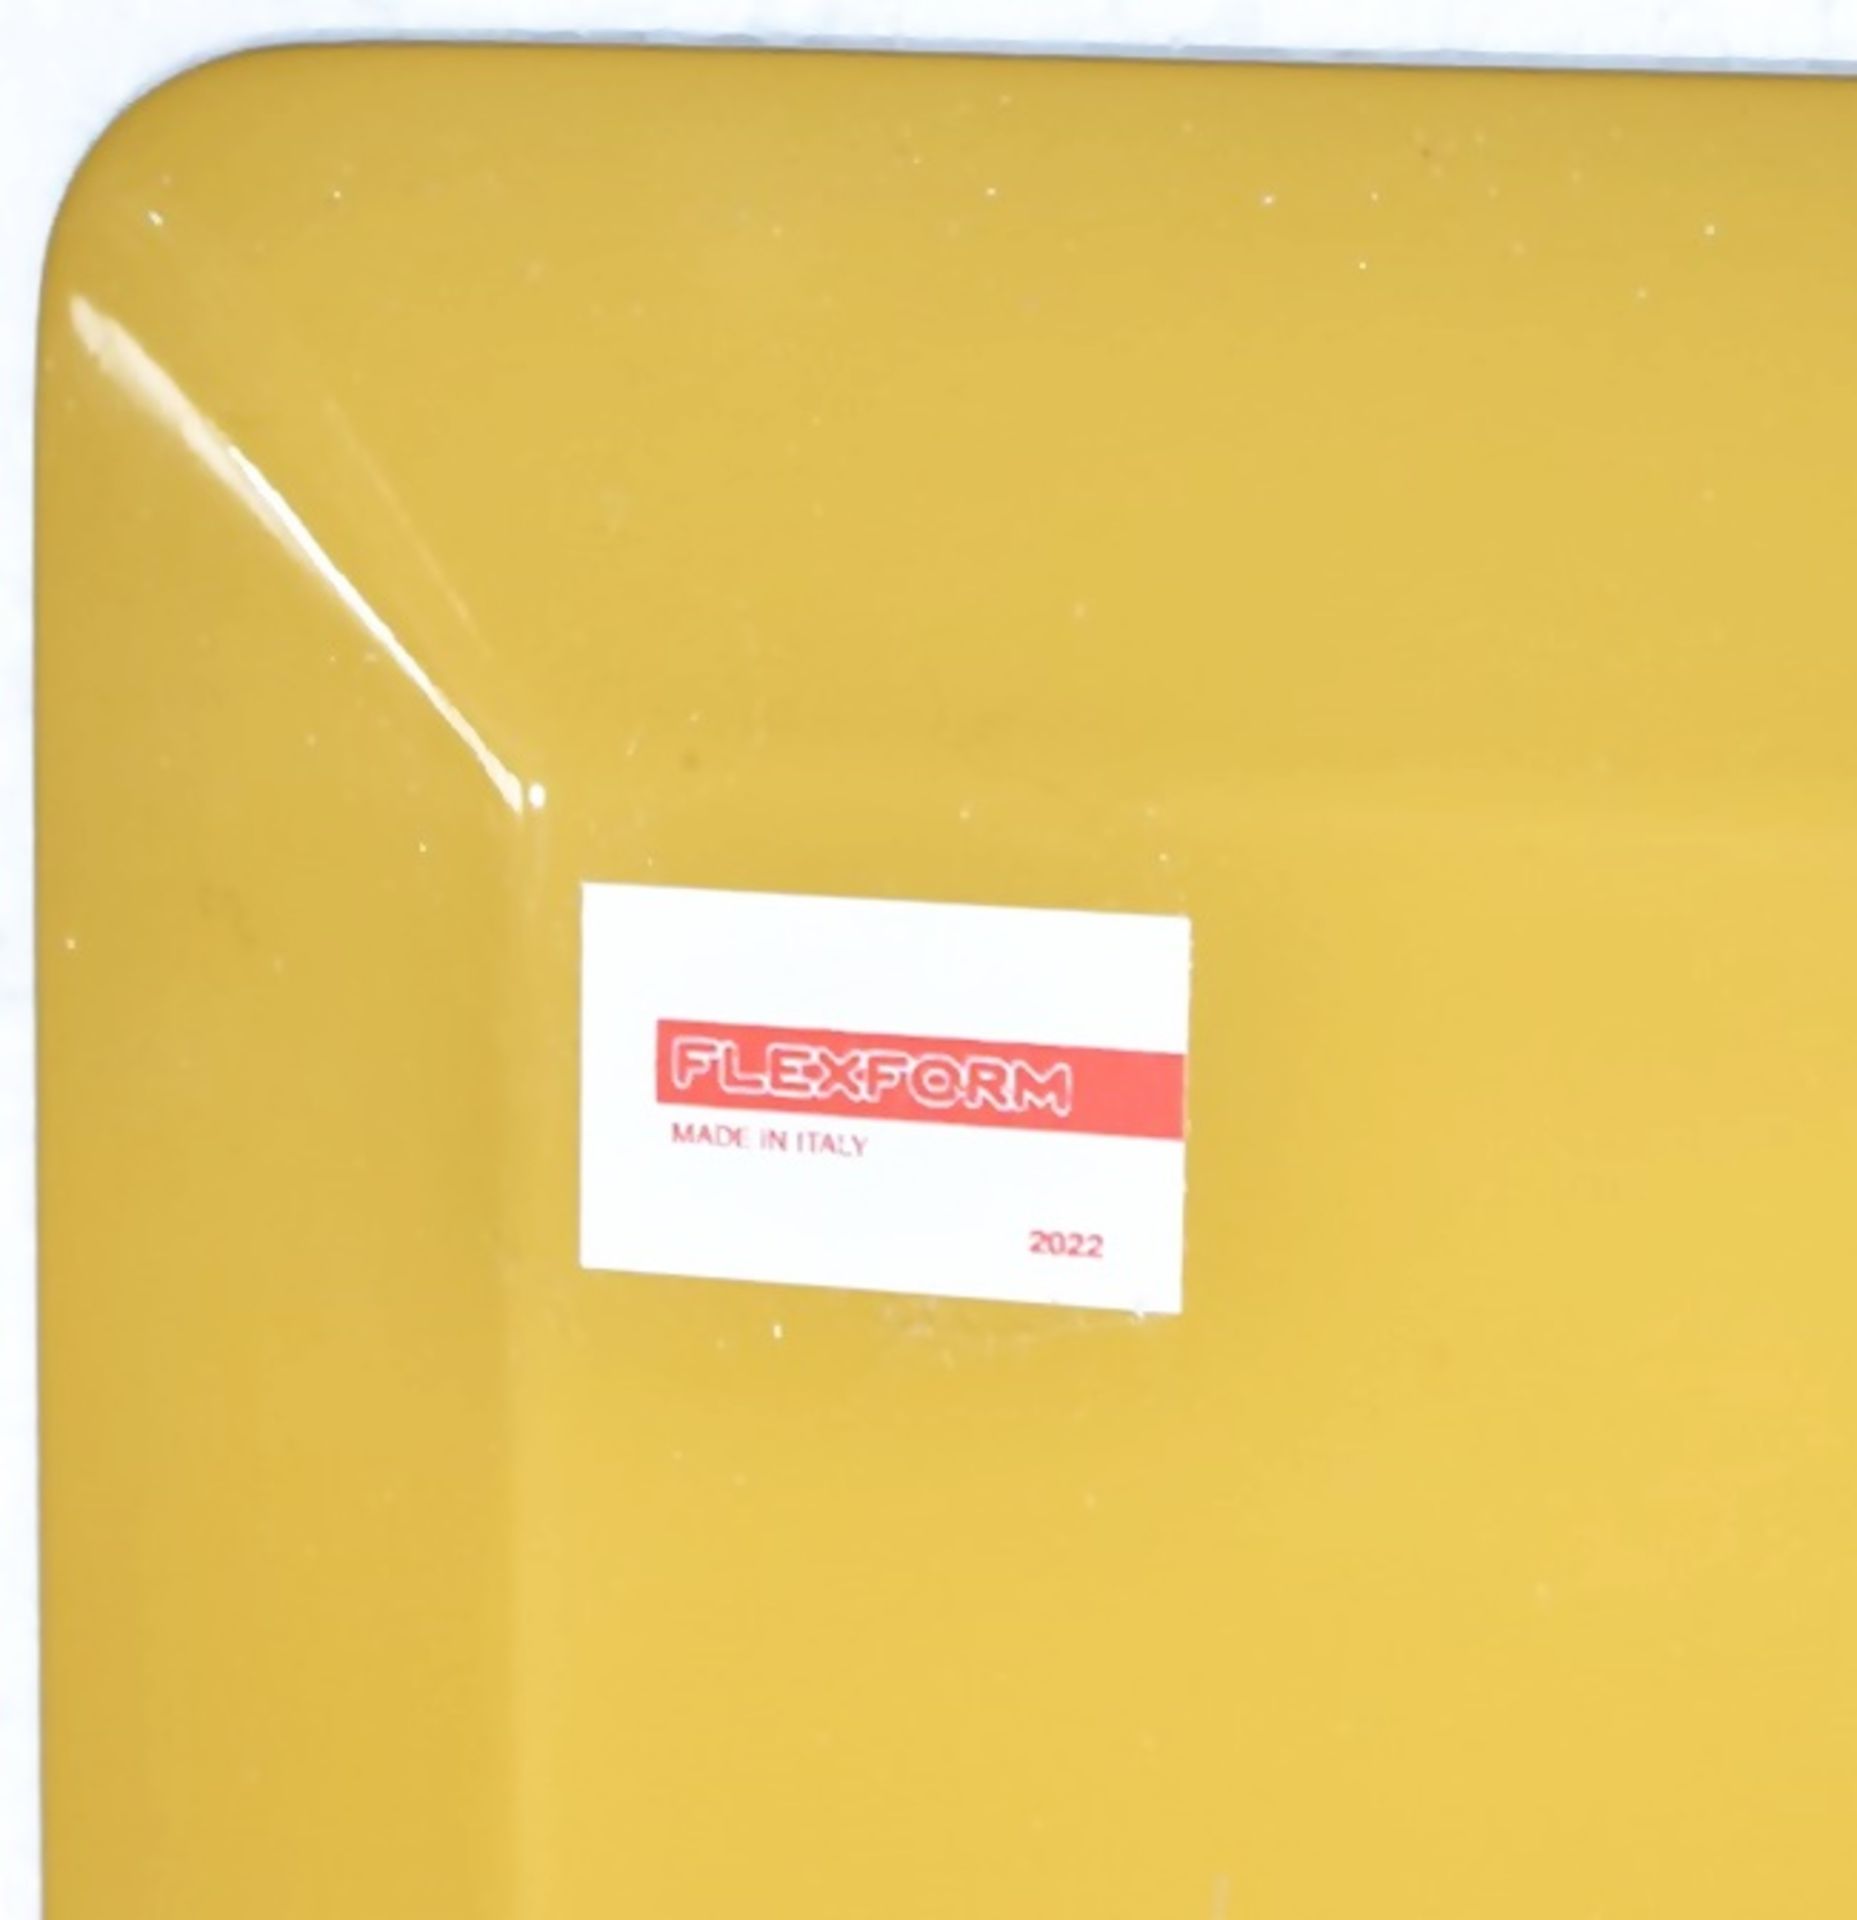 1 x FLEXFORM 'Fly' Designer Square 80x80cm Table Top with a Lacquered Mustard Yellow Finish - Image 4 of 8